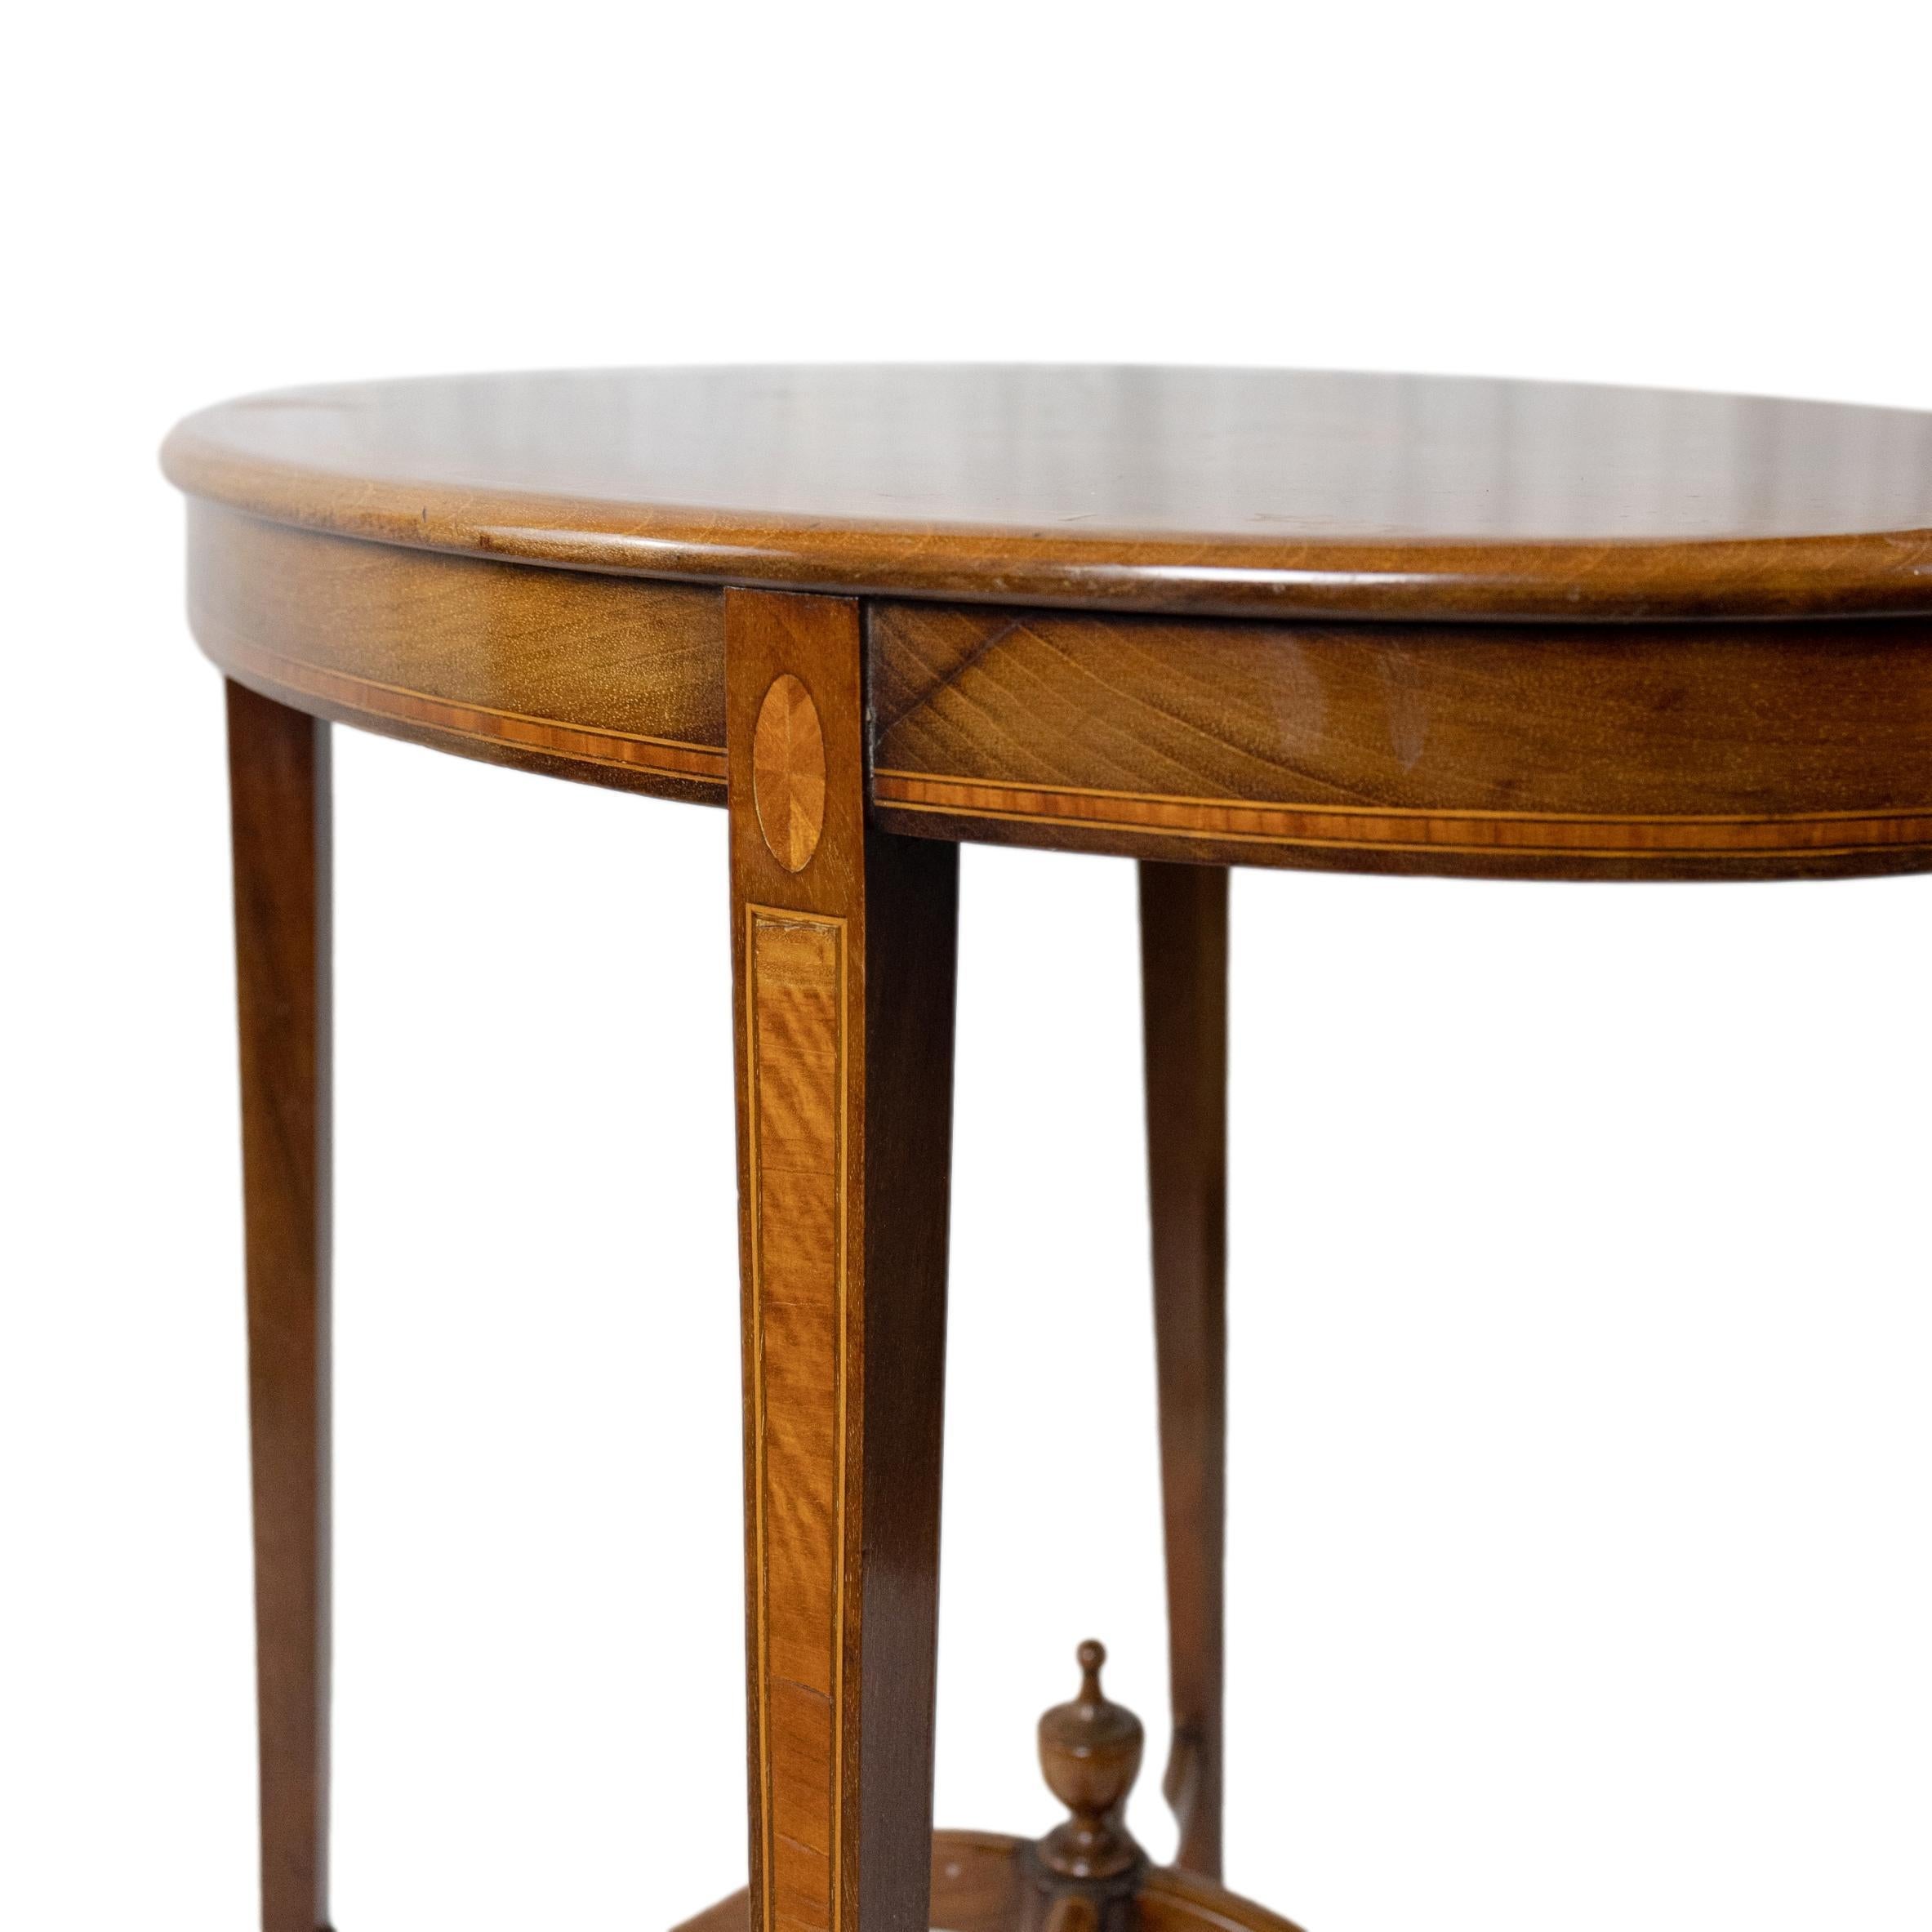 Figured Mahogany and Satinwood-Inlaid Oval Occasional Table, English, ca. 1890 For Sale 1